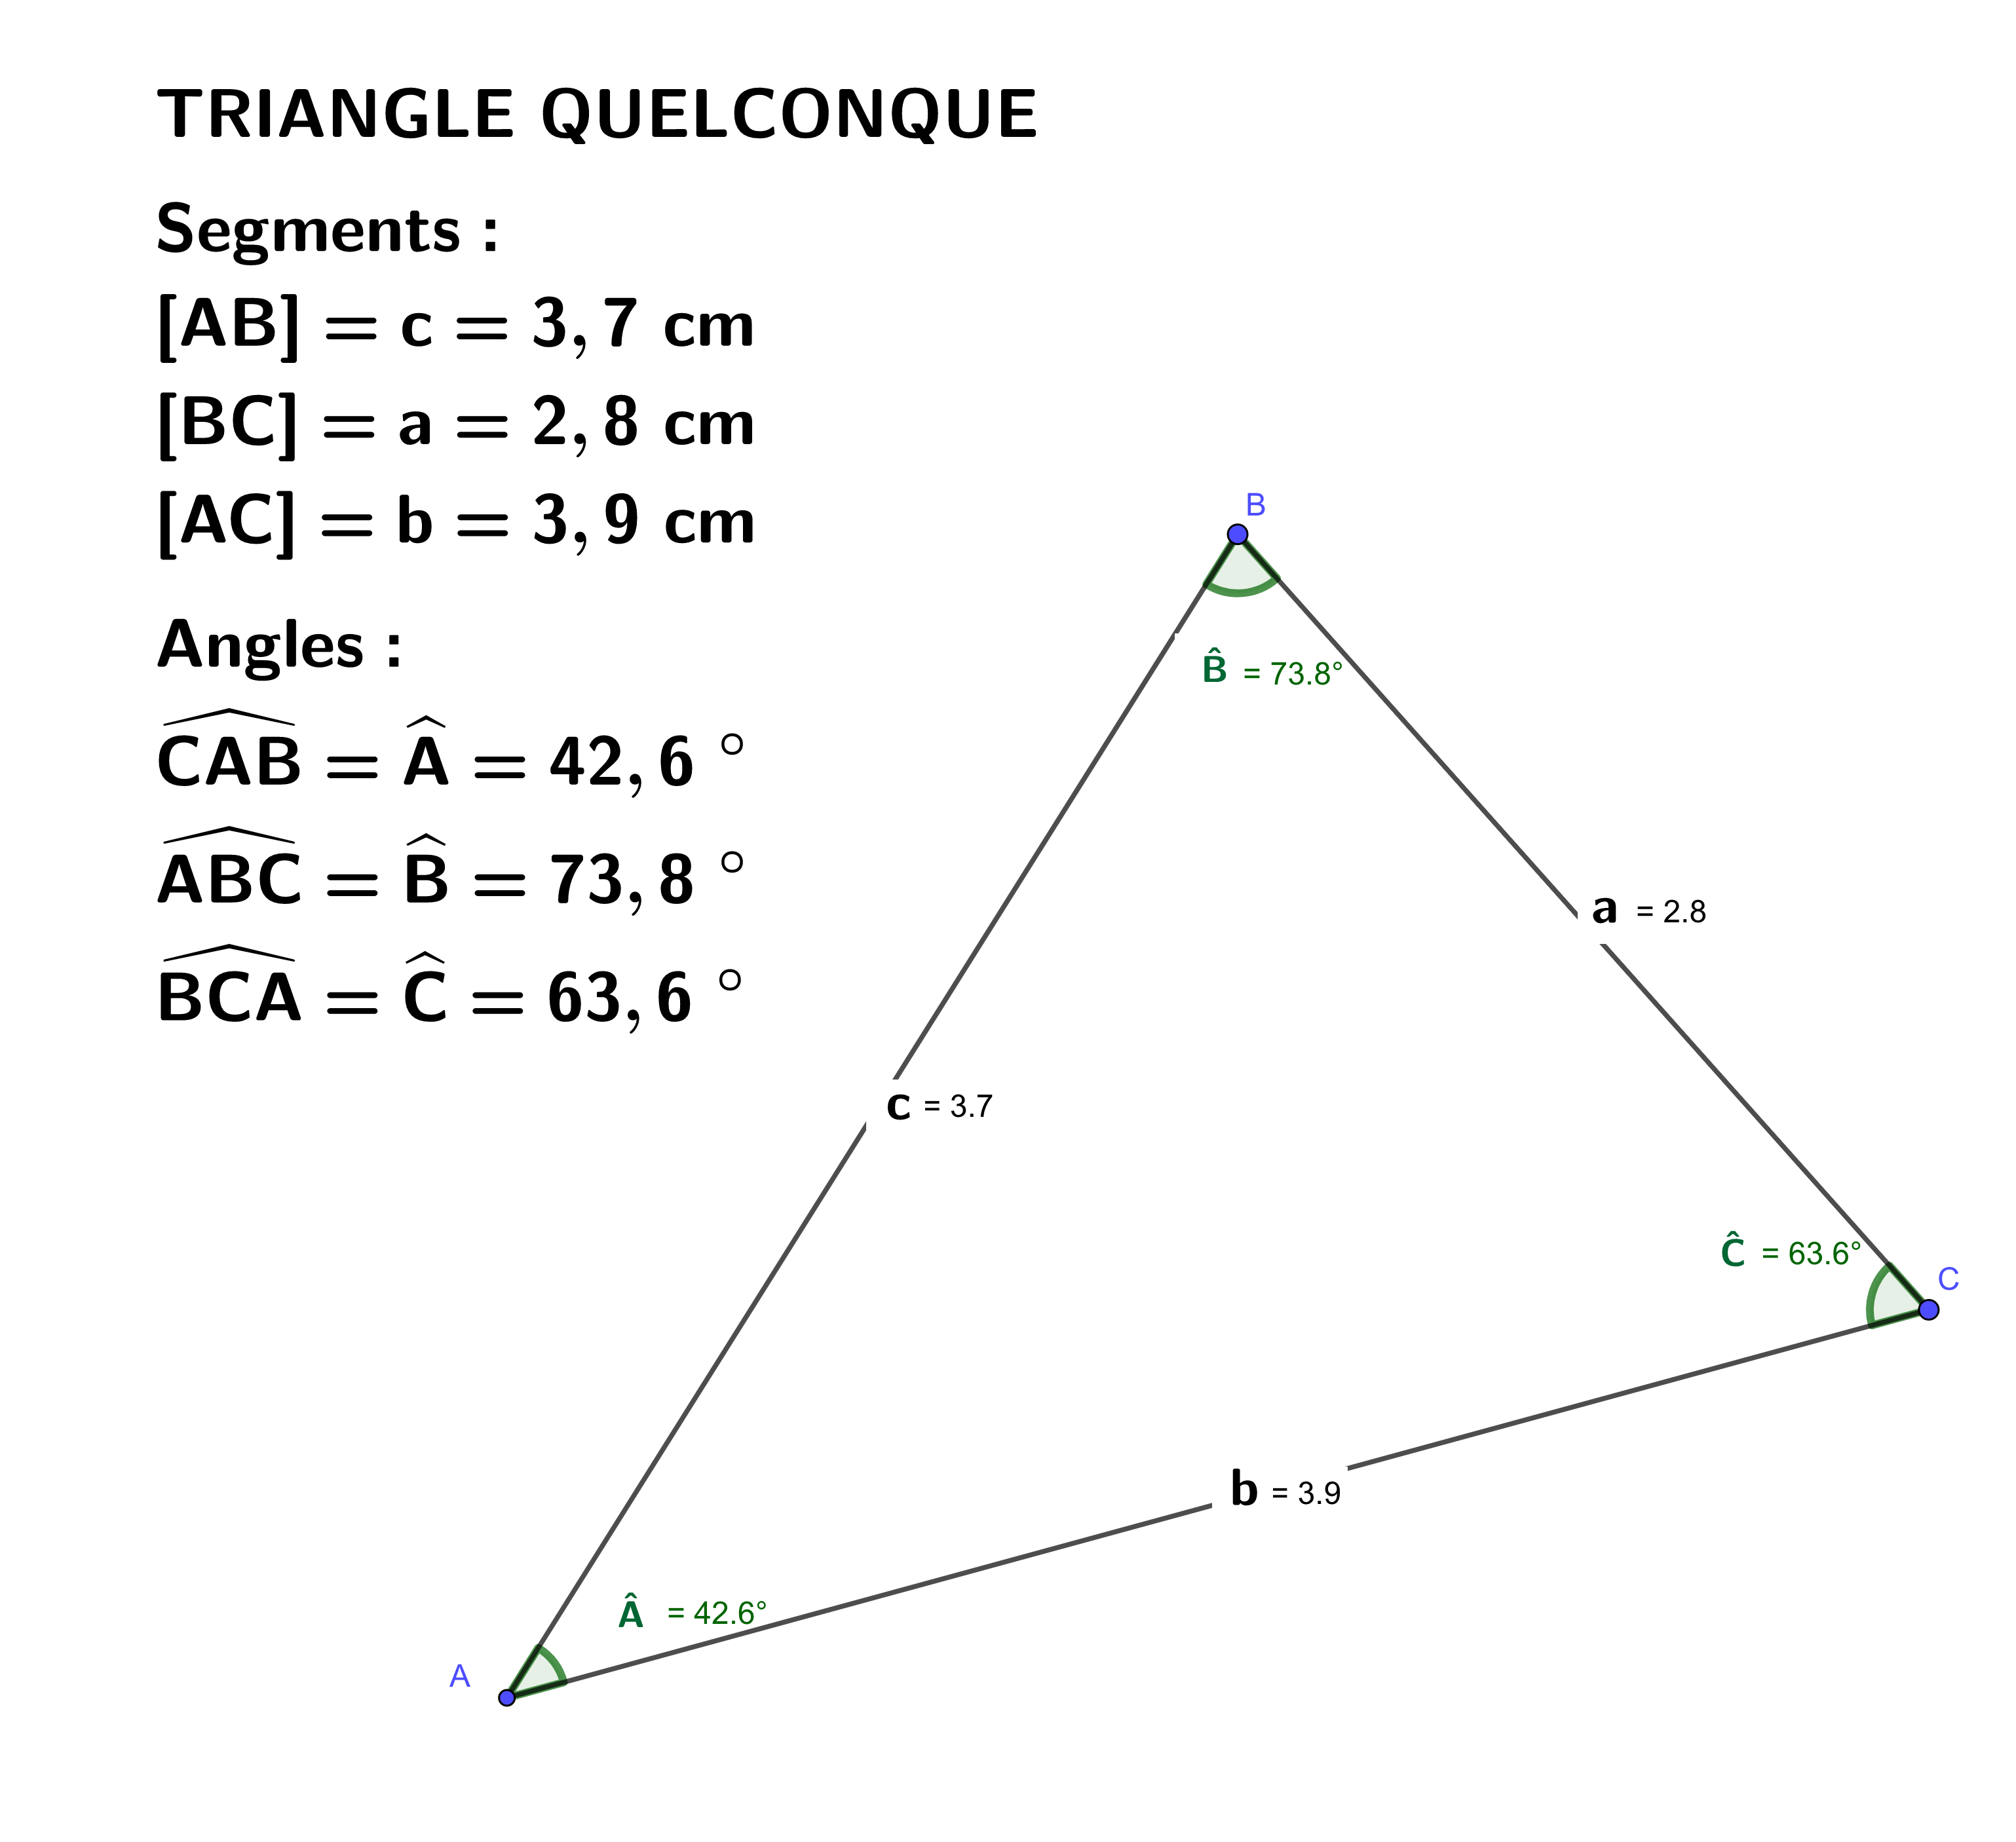 geogebra/triangle-quelconque.png